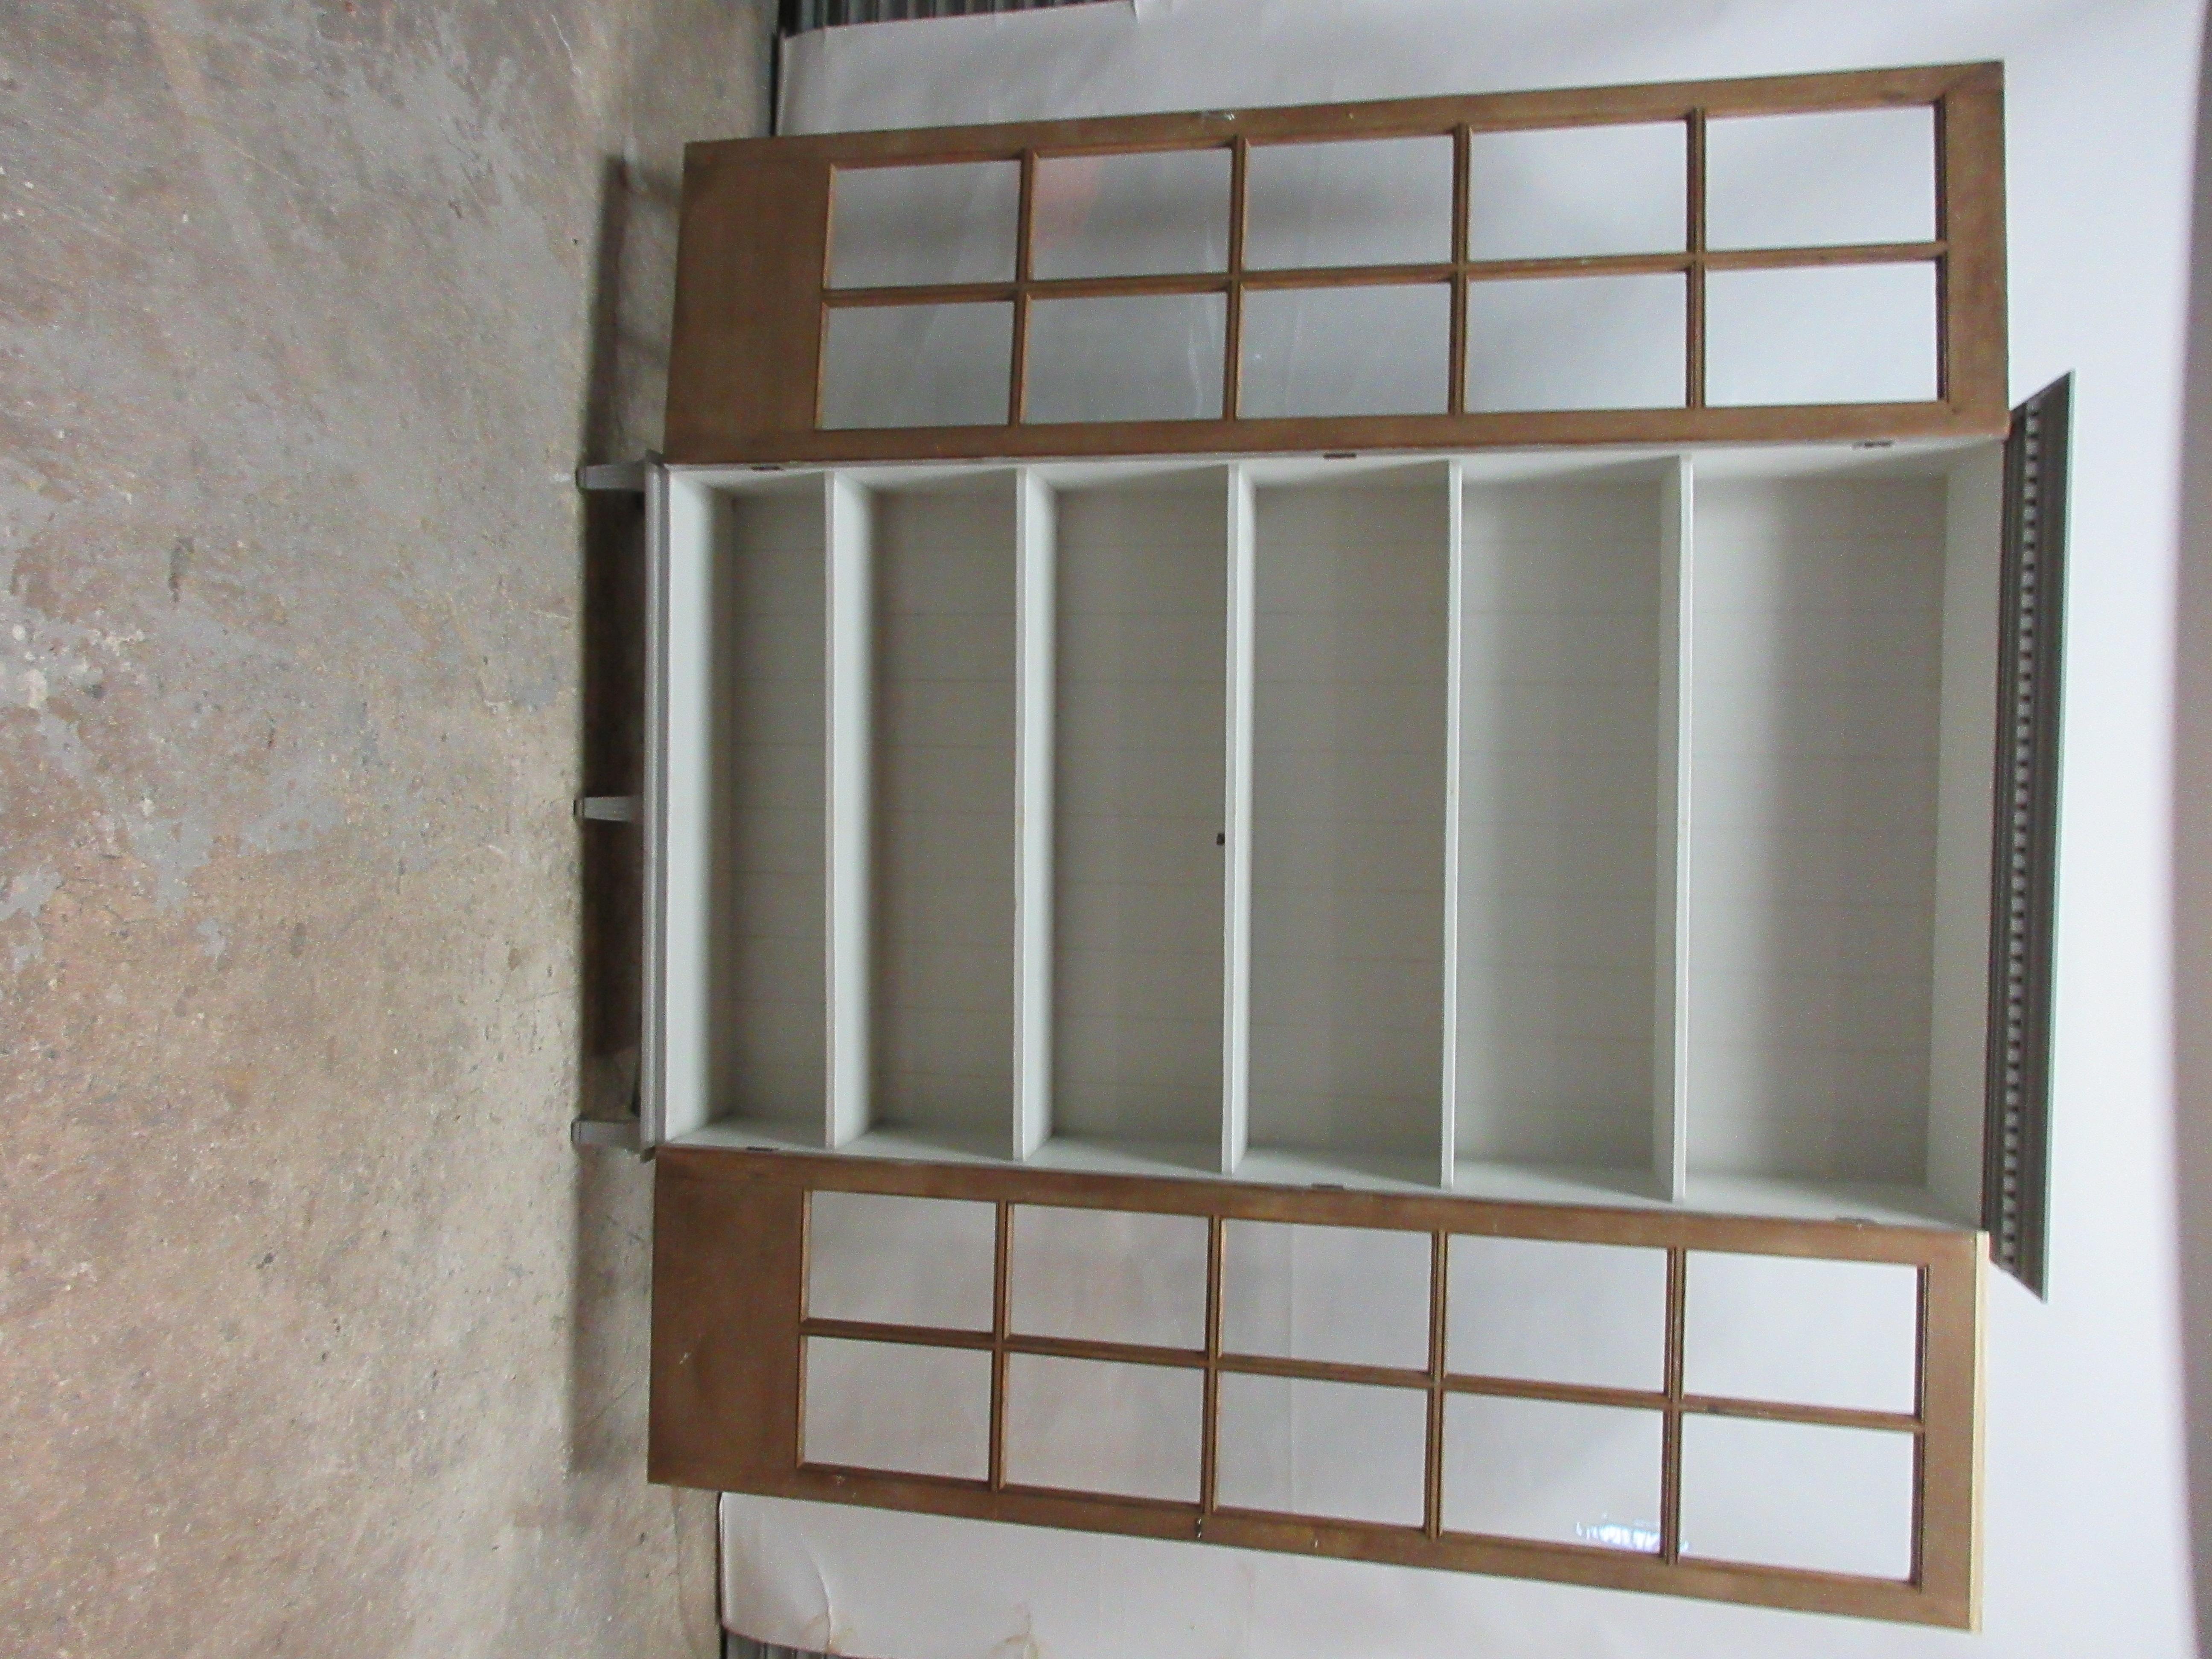 This is a Narrow cabinet and needs to be mounted to a wall so it will not fall over when the doors are open.